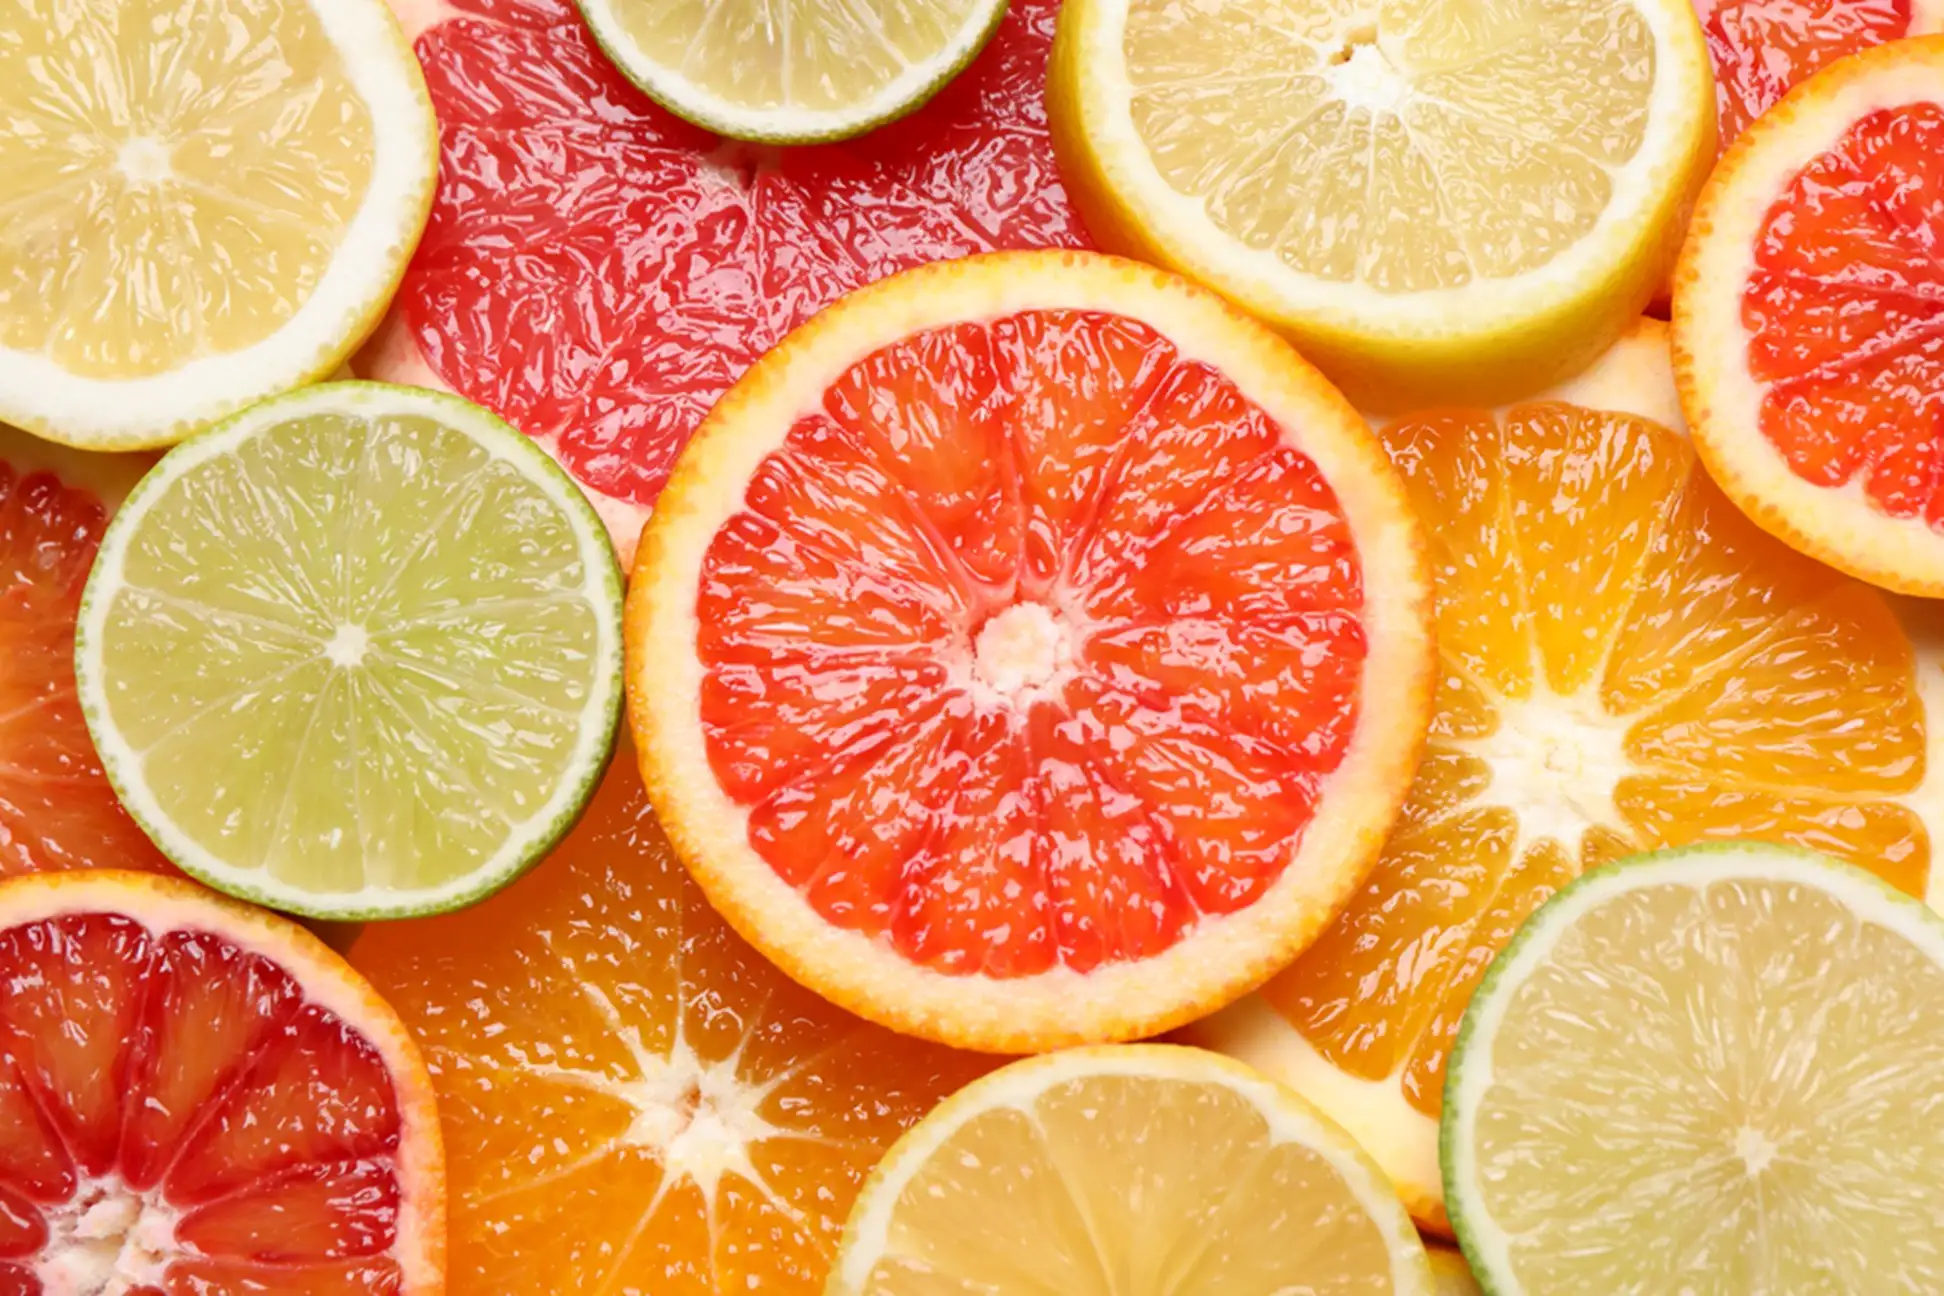 thin slices of grapefruits